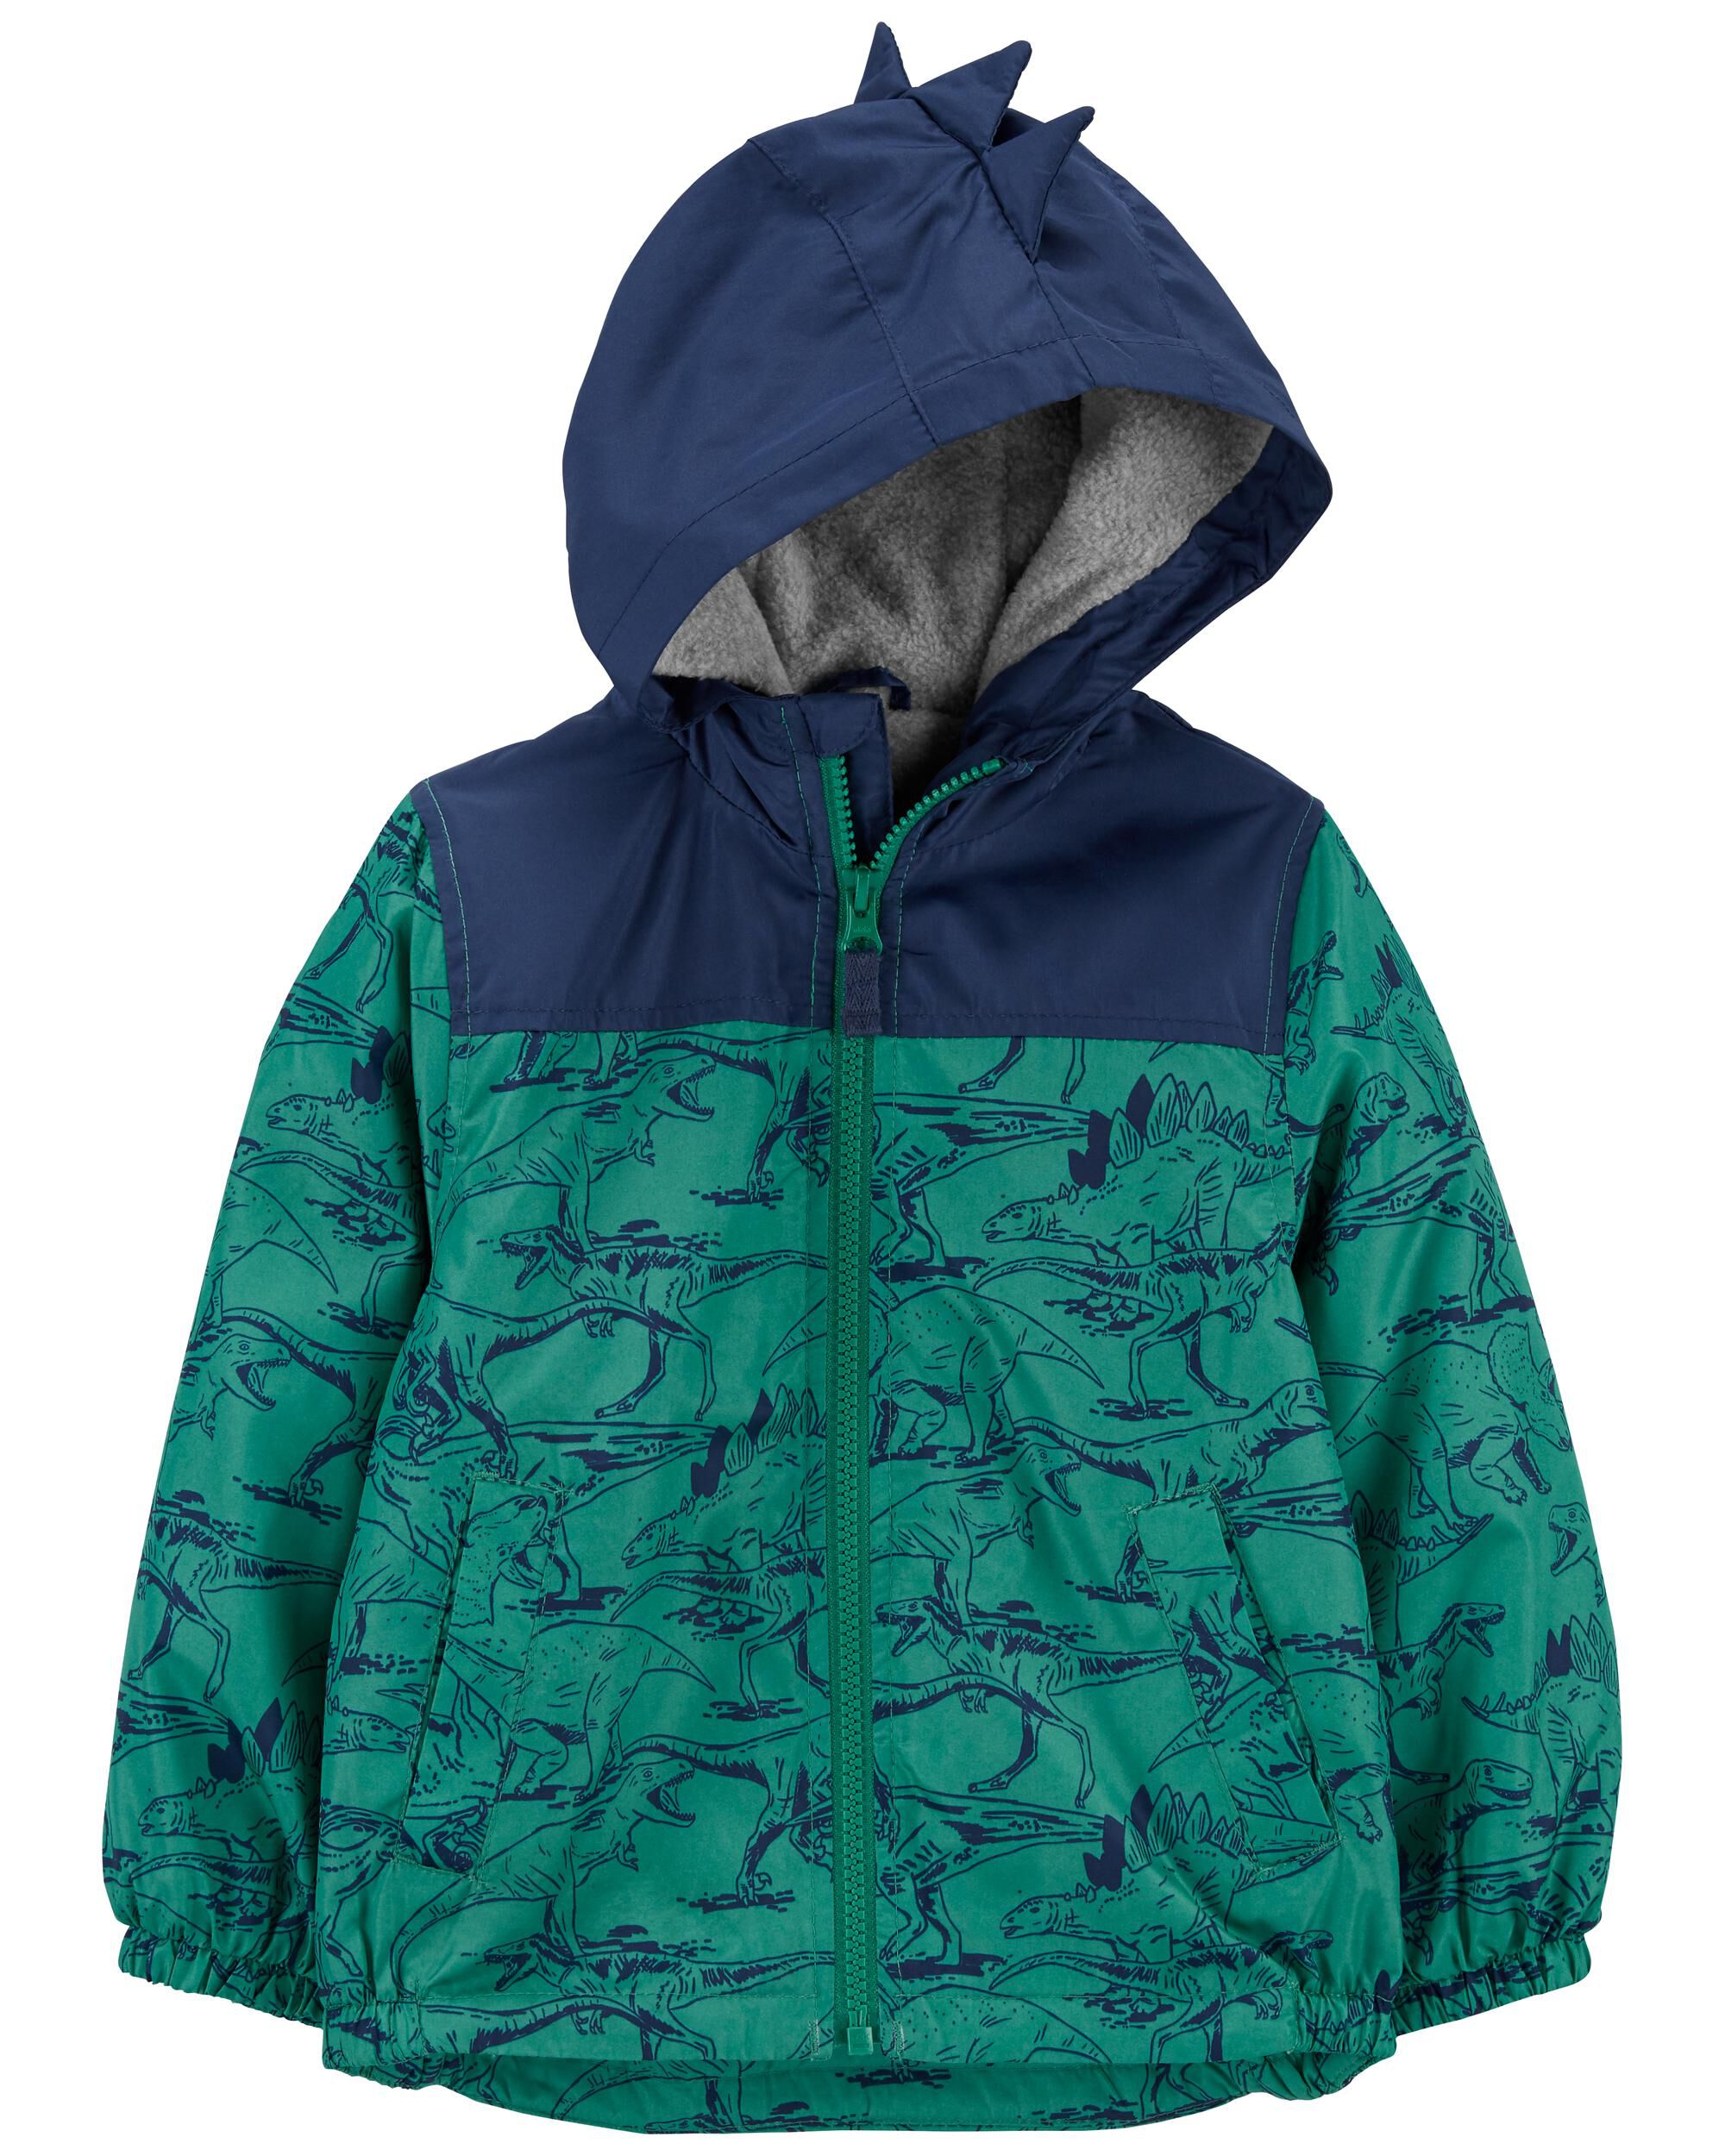 Details about   New Oshkosh Fleece Lined Puffer Jacket with Hat  Boy Toddler 3T 